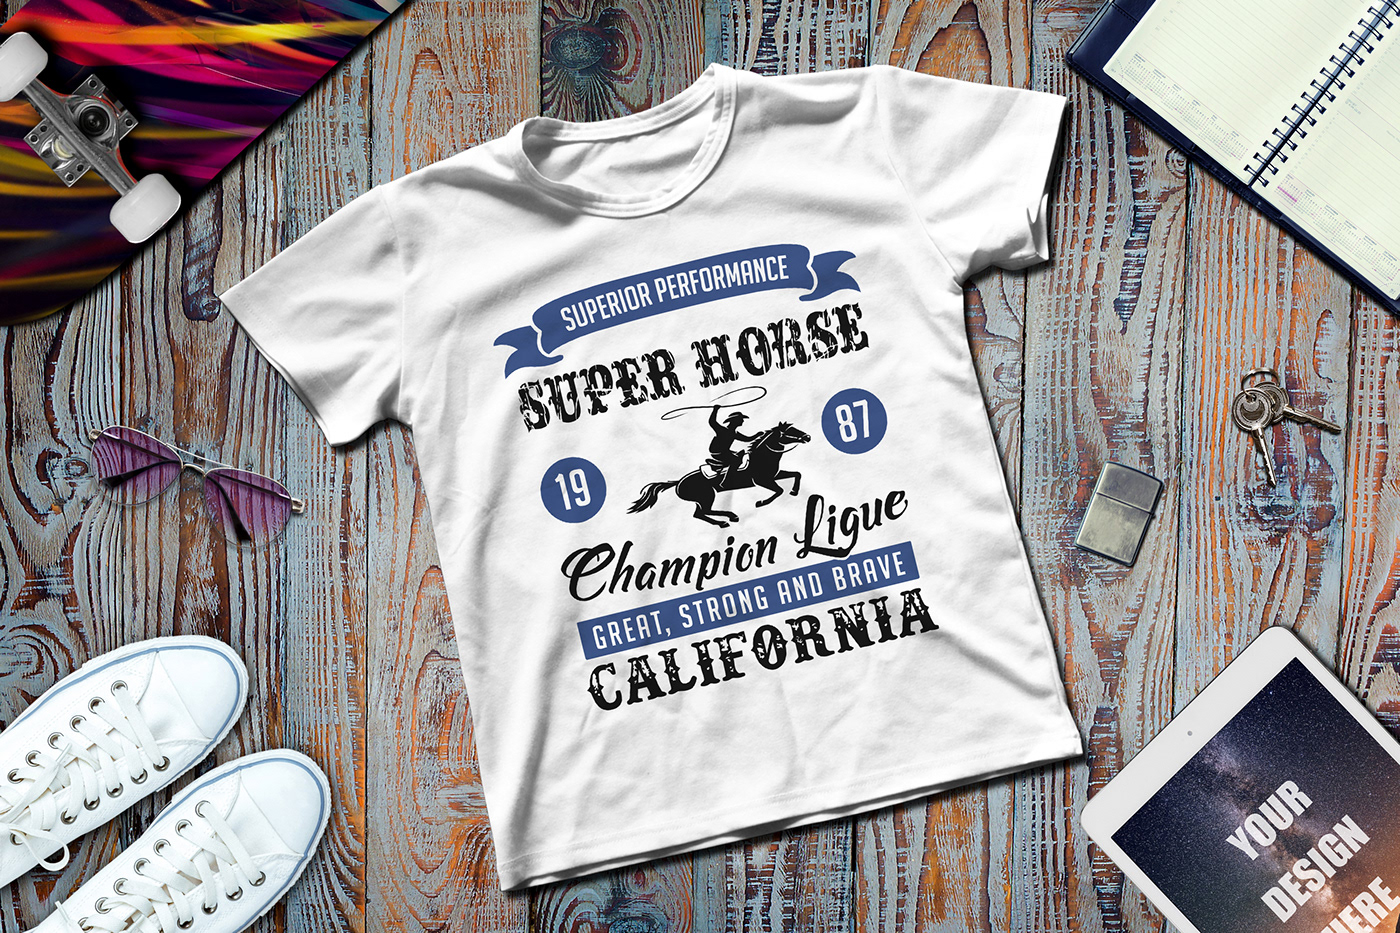 horse t-shirts horse t-shirts with funny sayings horse t shirt designs horse t shirts with shirt girl horse t shirts uk horse t shirts australia horse t shirt ideas horse